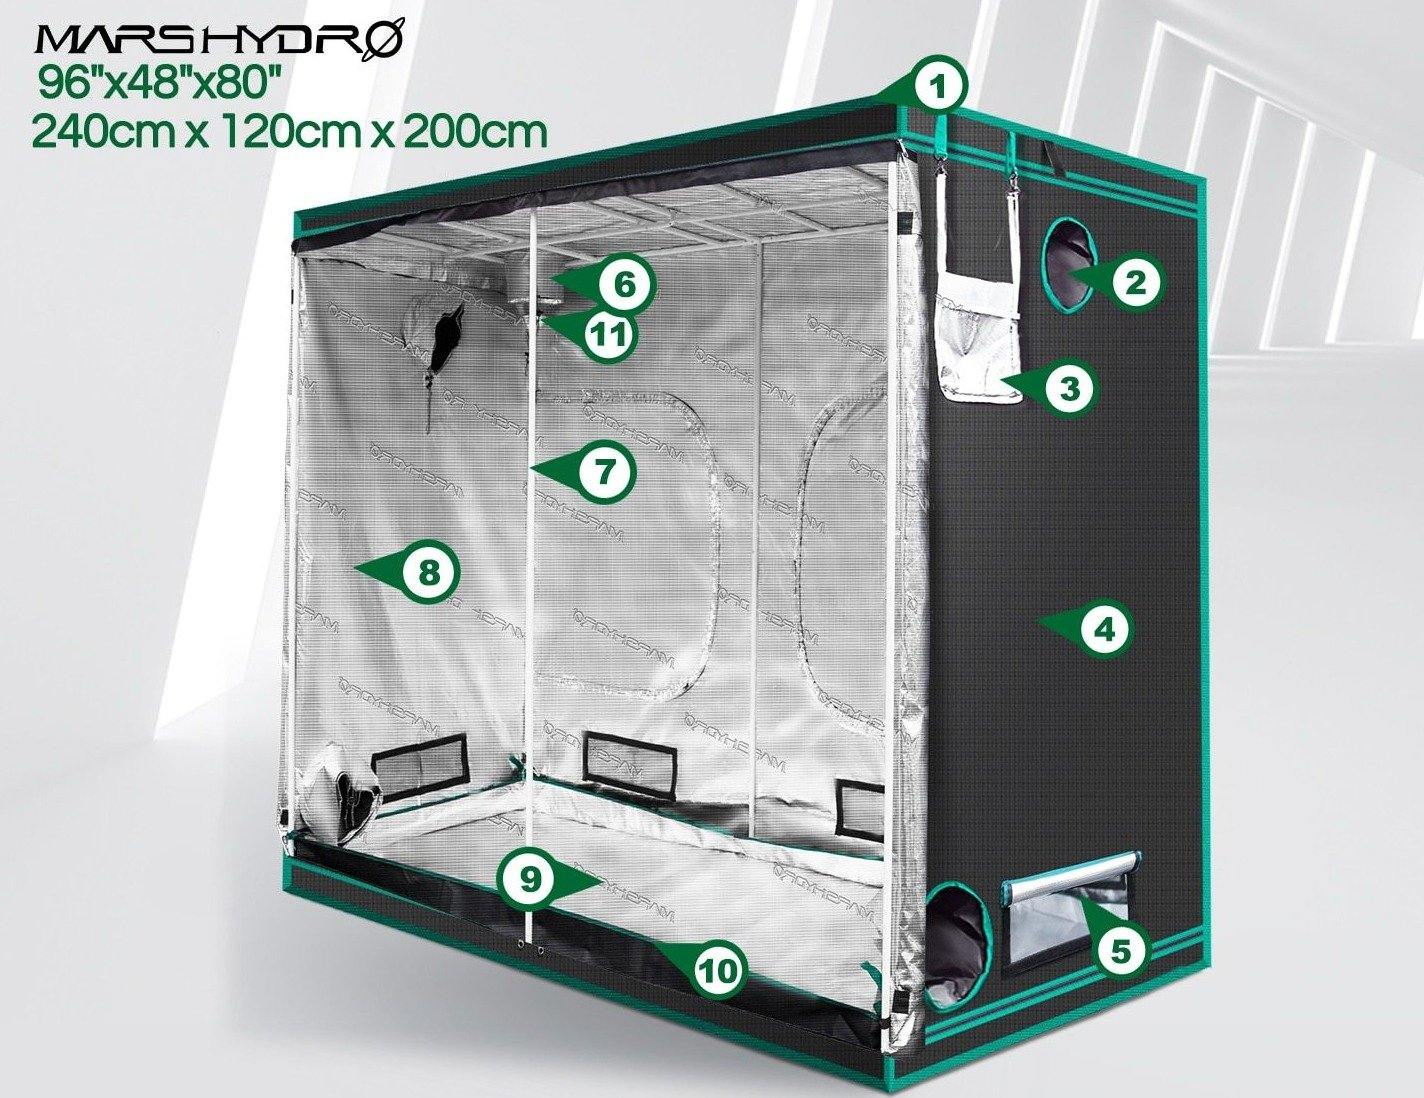 Full LED Indoor Growing System Tent For Hydroponic Gardening - Buy Confidently with Smart Sales Australia